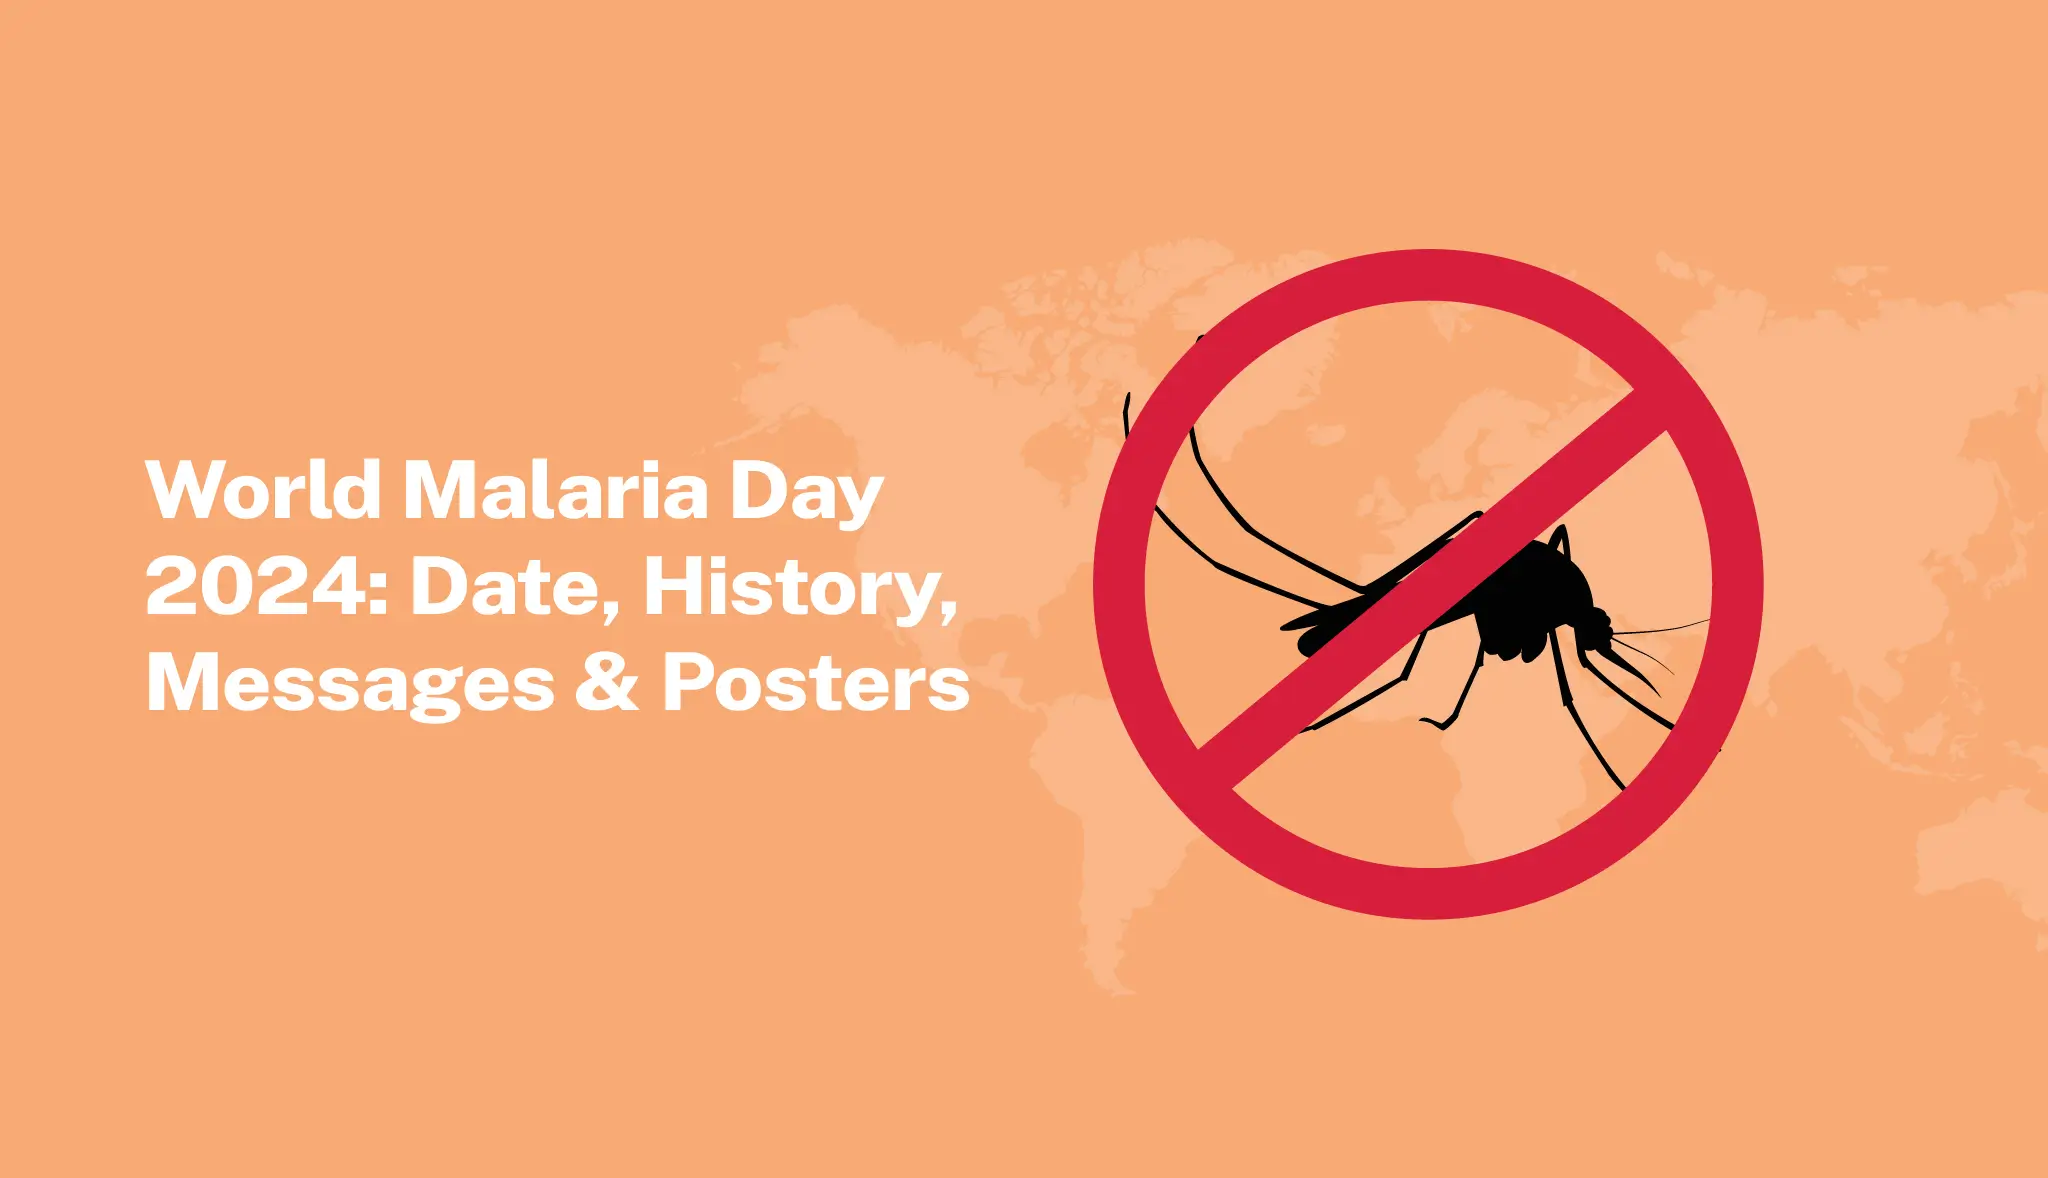 World Malaria Day 2024: Date, Theme, History, Poster & Messages - Postive